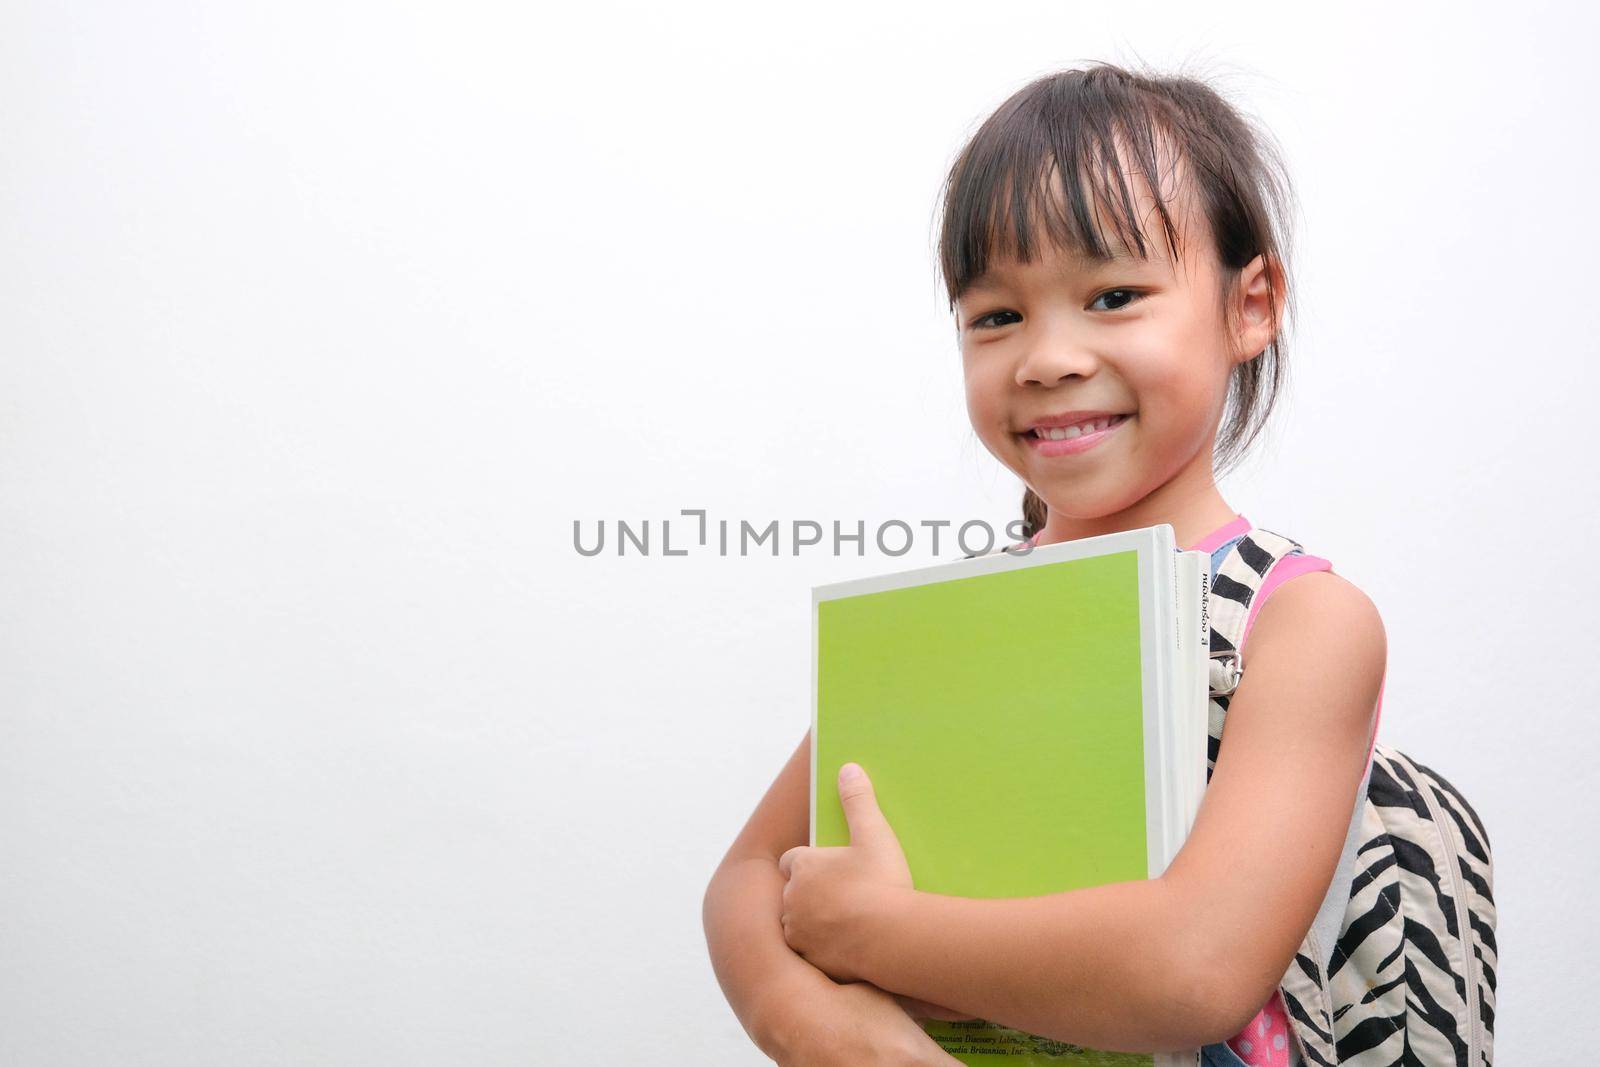 Back to school. Smiling little girl carrying a backpack holding books looking at the camera on a white background with copy space. Girl glad ready to study. by TEERASAK